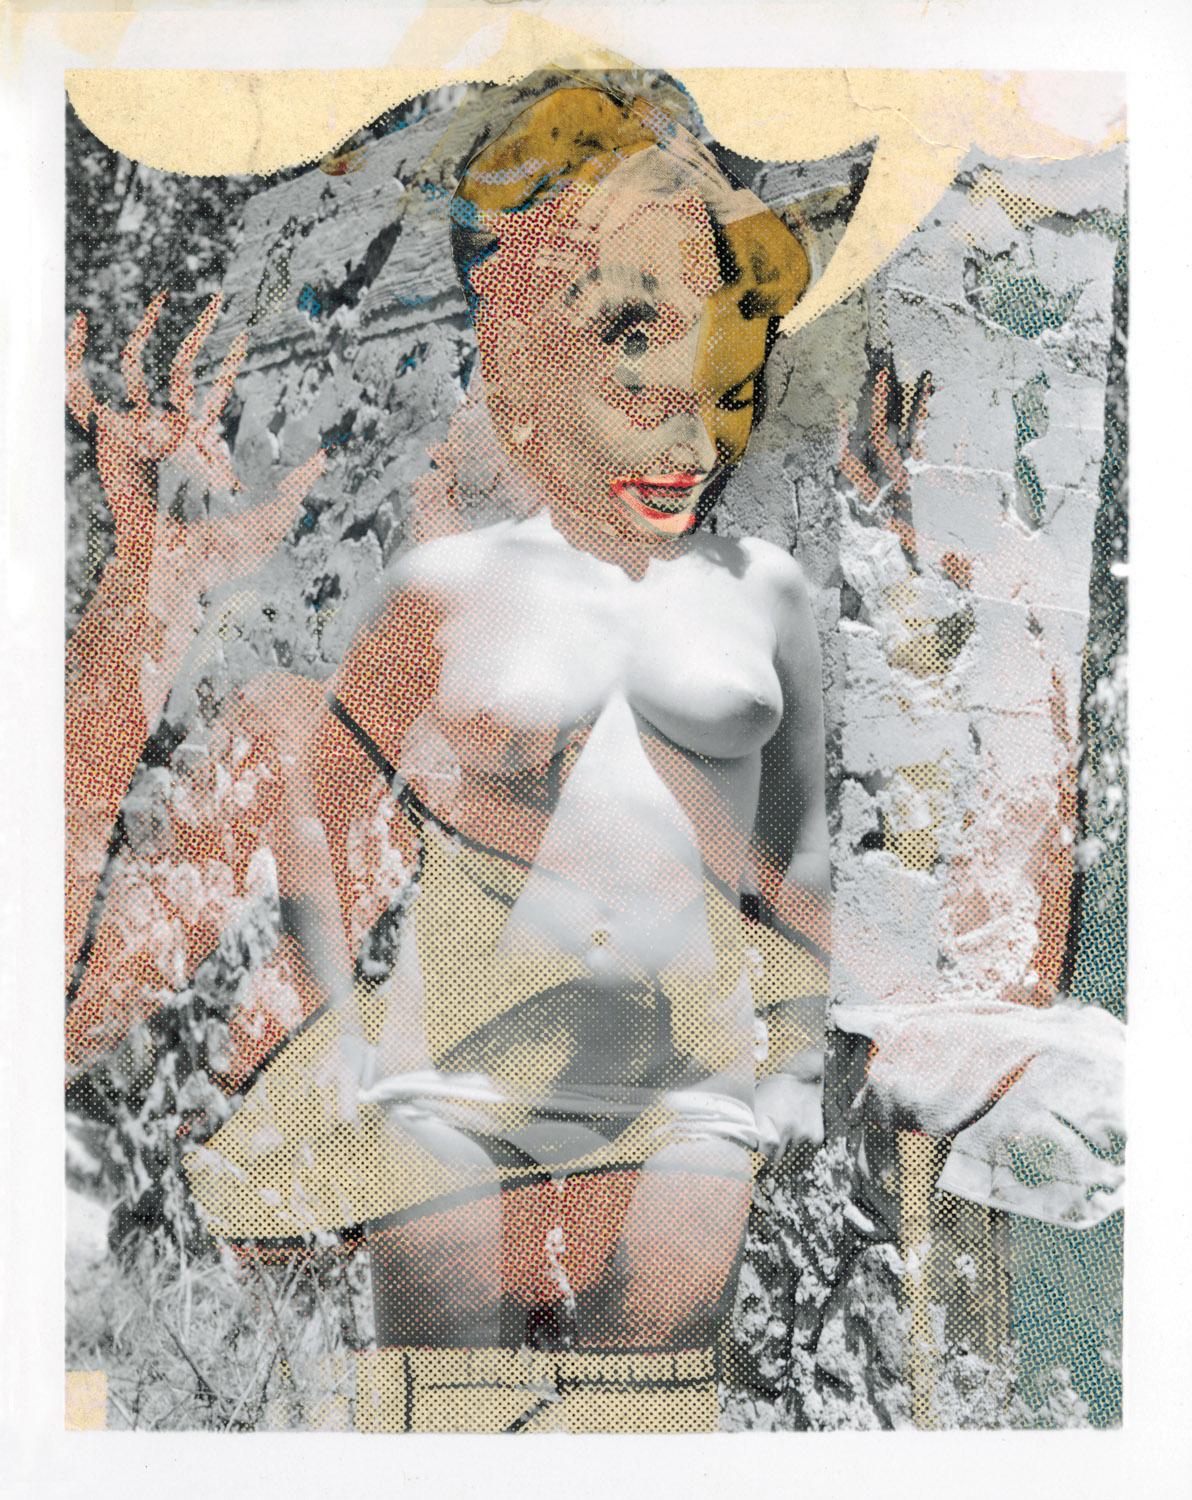   Woman 1,  2005, 19 1/2 x 16", digital print and frame. (work on paper) 